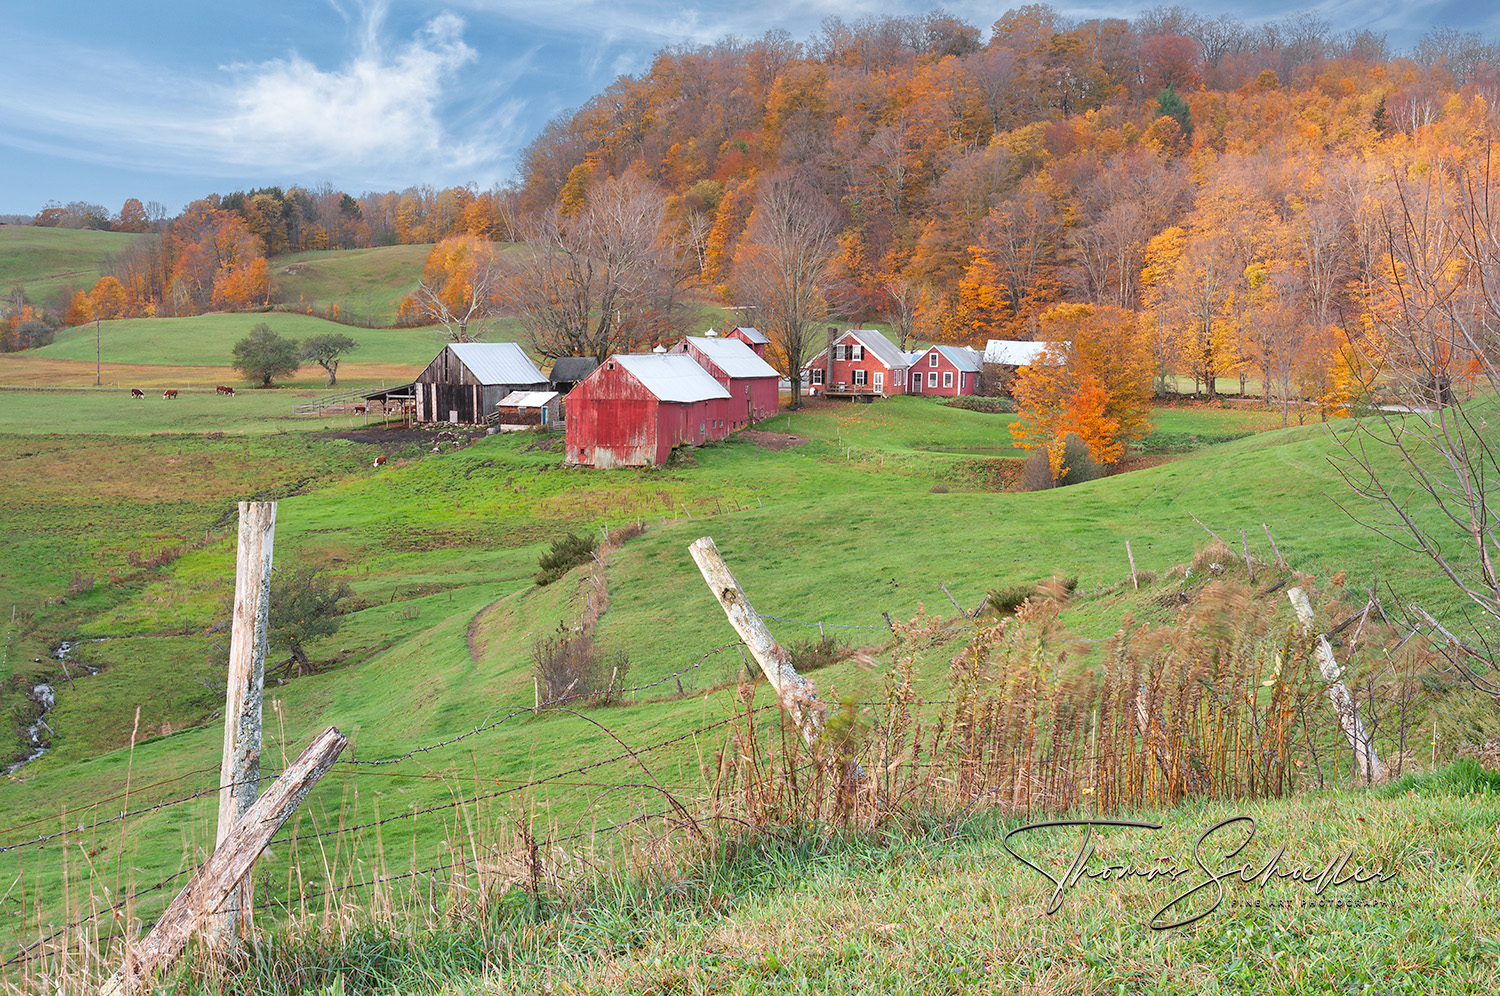 A Pastoral Autumn View of the Vermont Icon Jenne Farm From Behind Barbed Wire Fencing | Fine Art New England Photography Prints